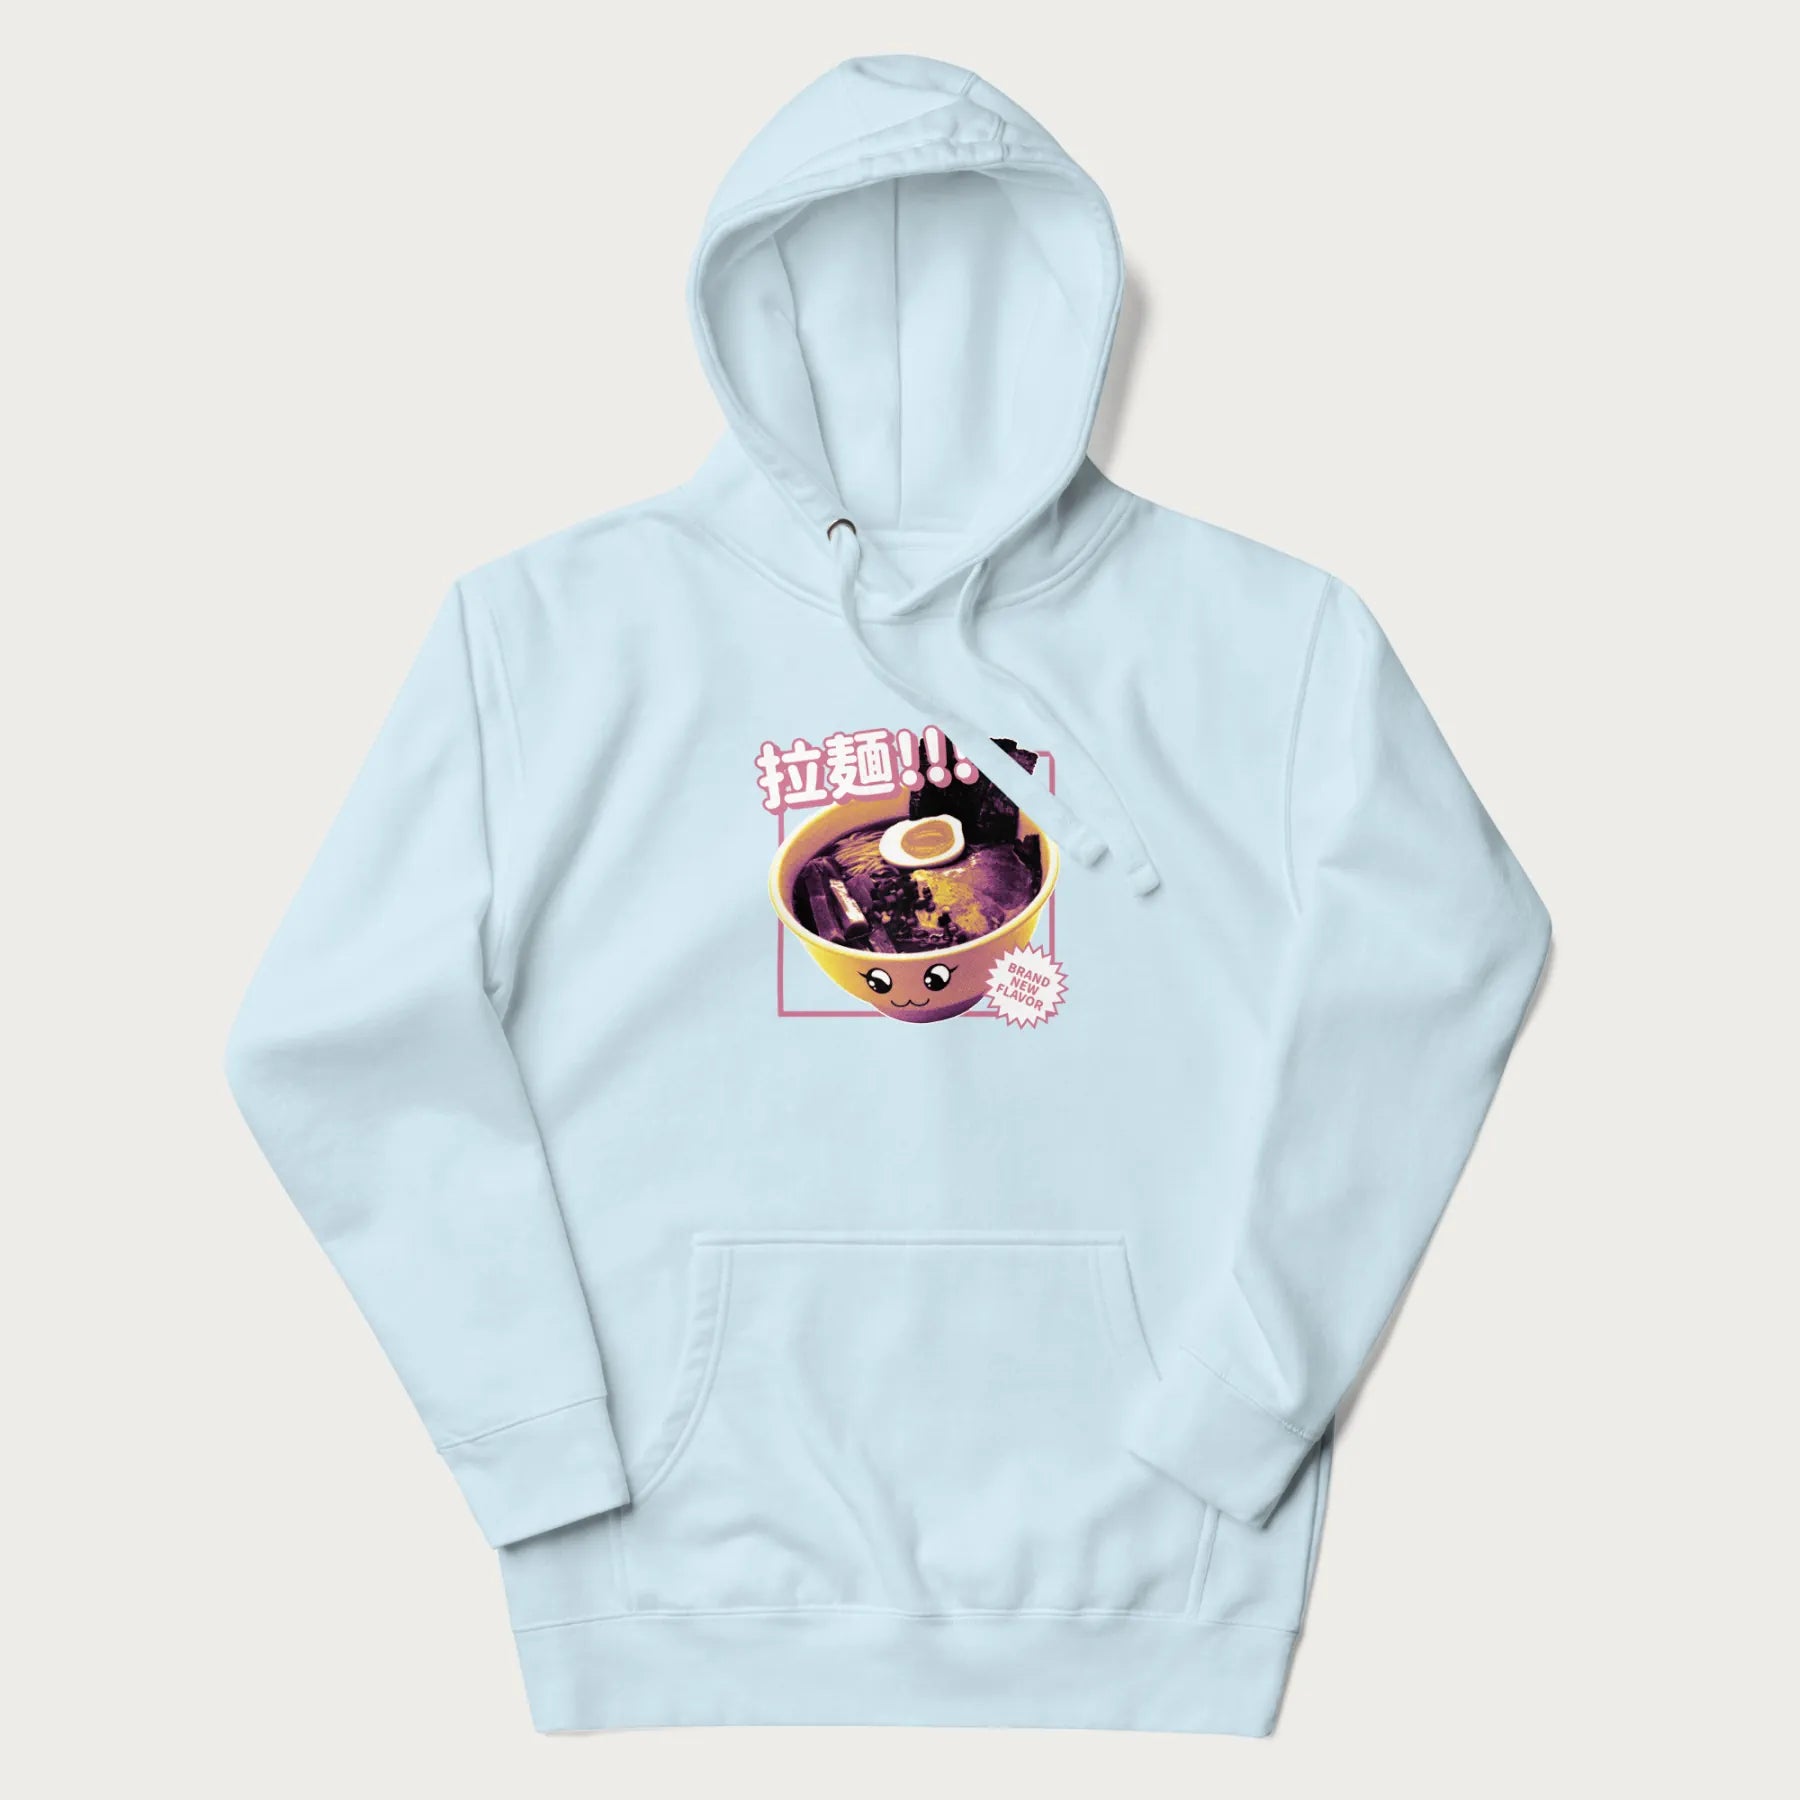 Light blue hoodie with Japanese text '拉麵!!!' (Ramen!!!) in vibrant pink and realistic ramen bowl graphic.